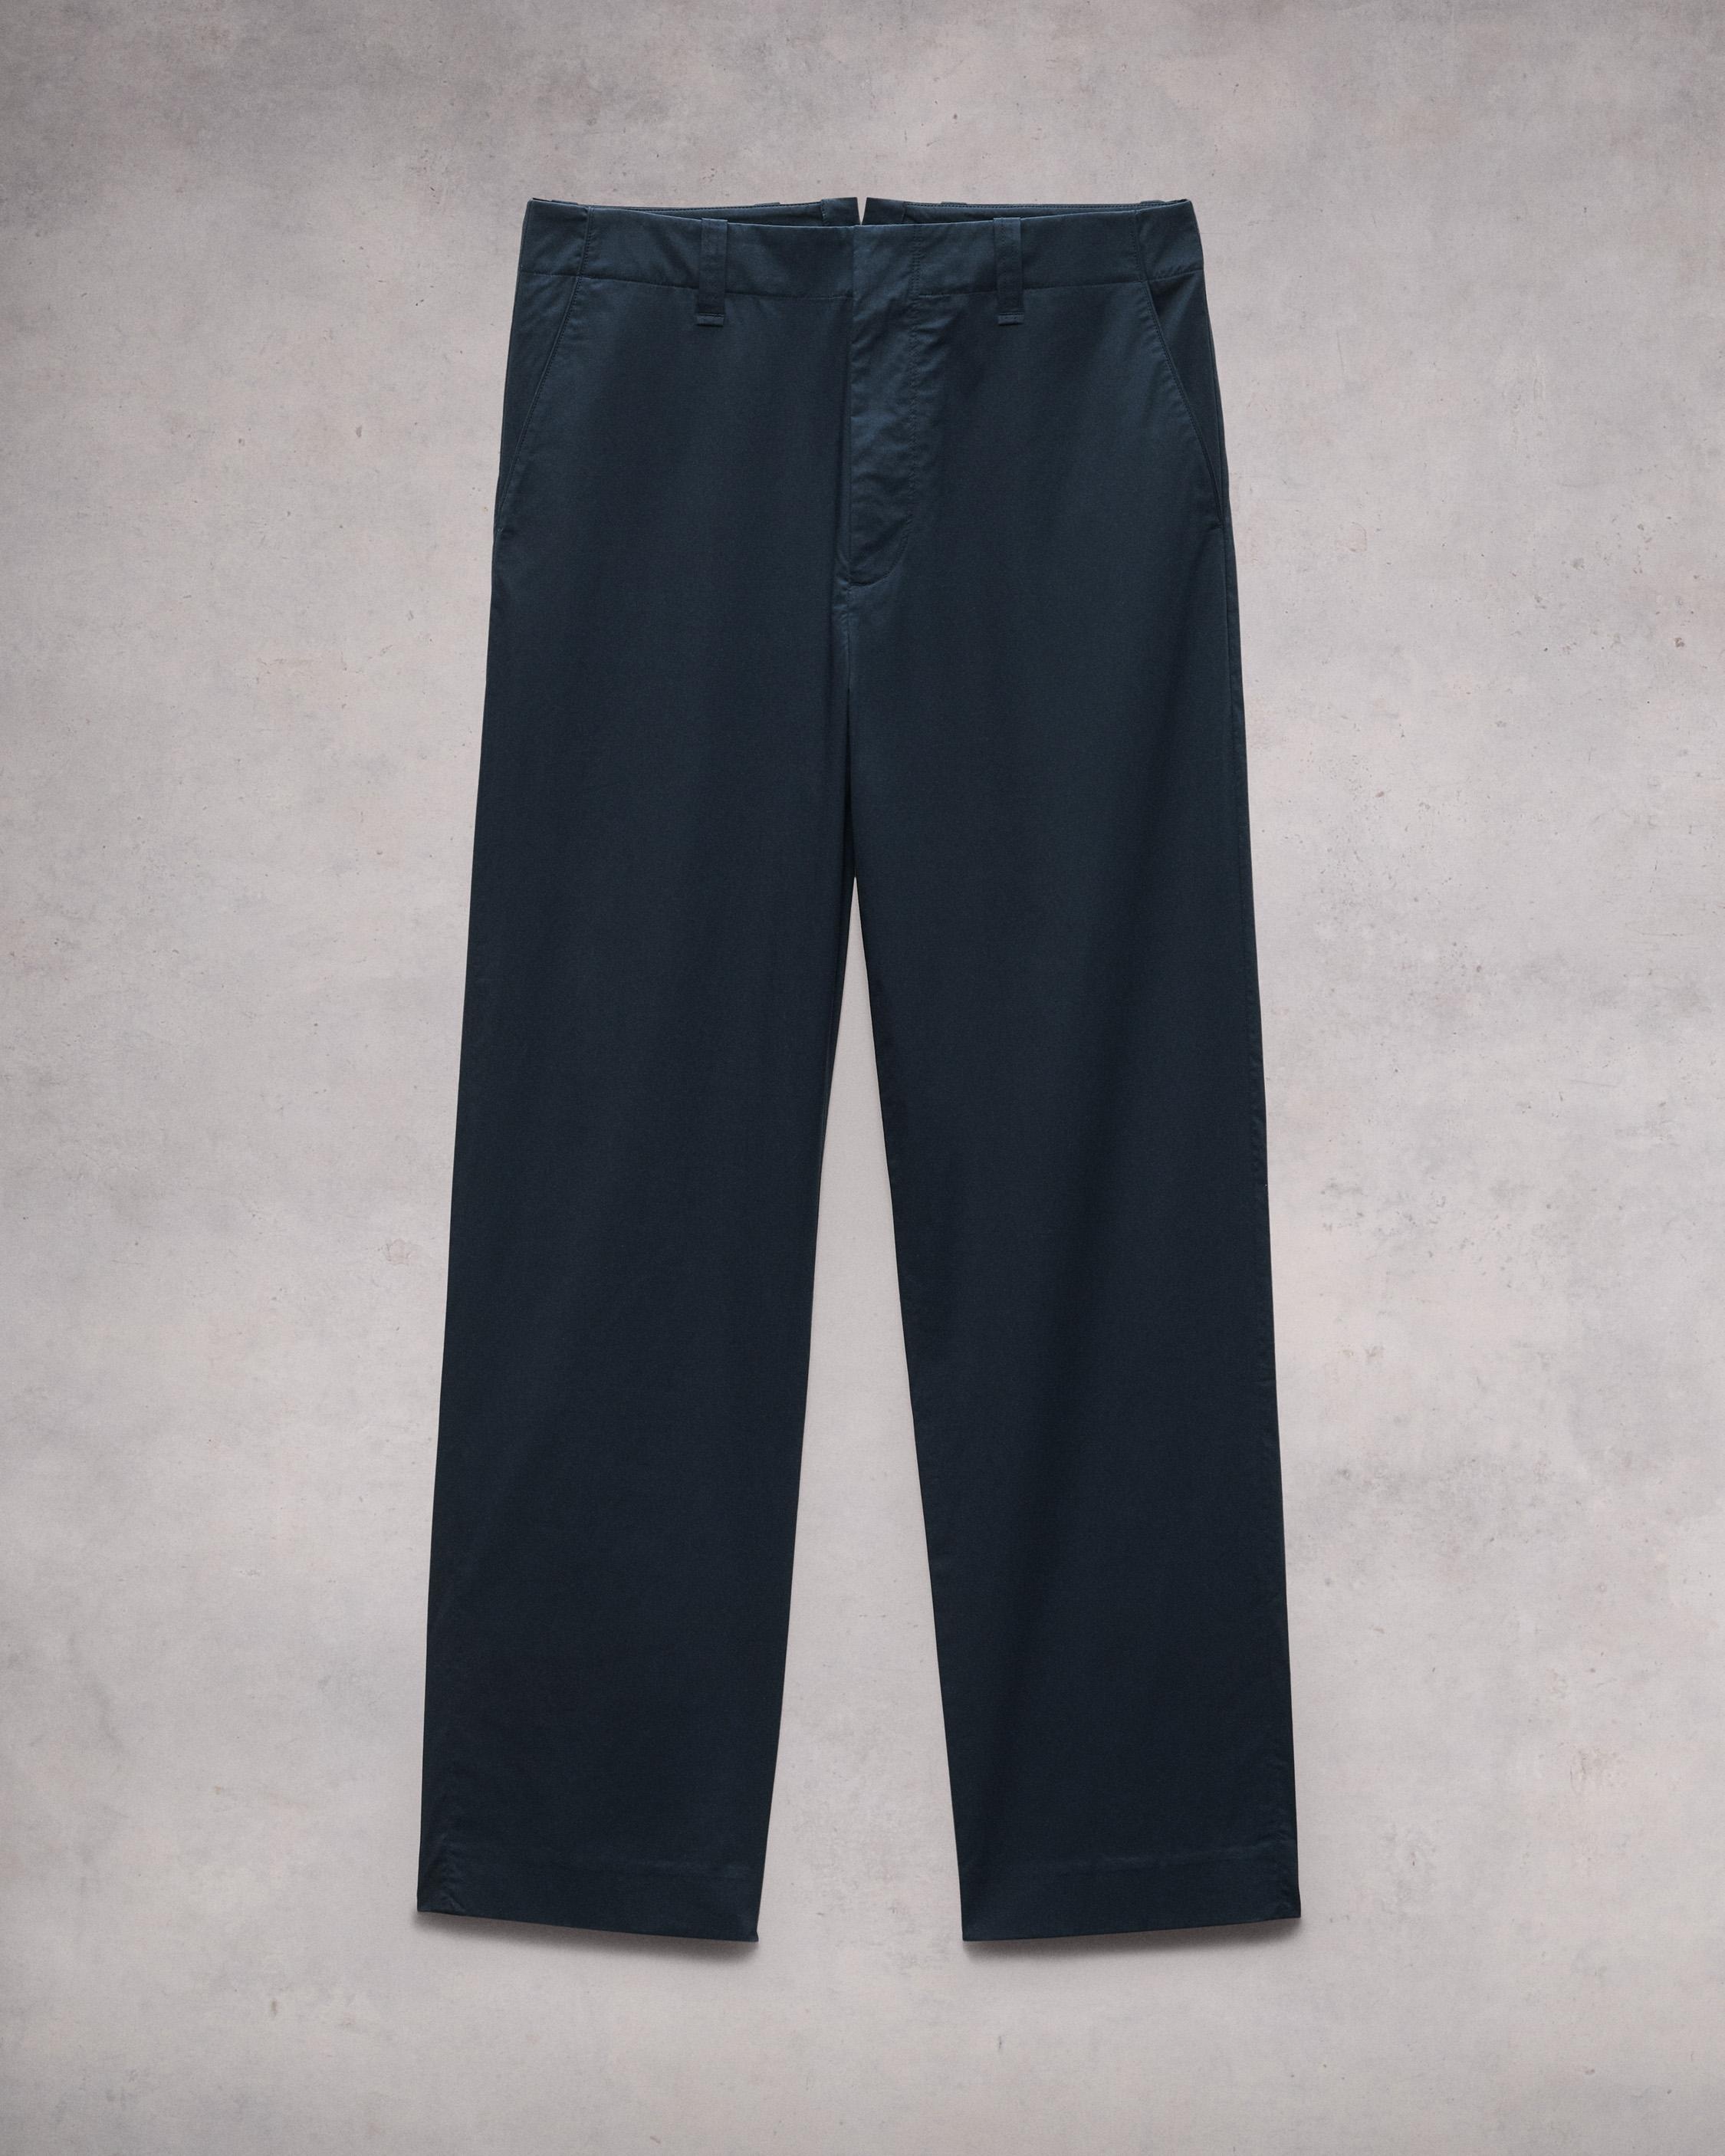 Bradford Cotton Poplin Pant
Relaxed Fit - 1